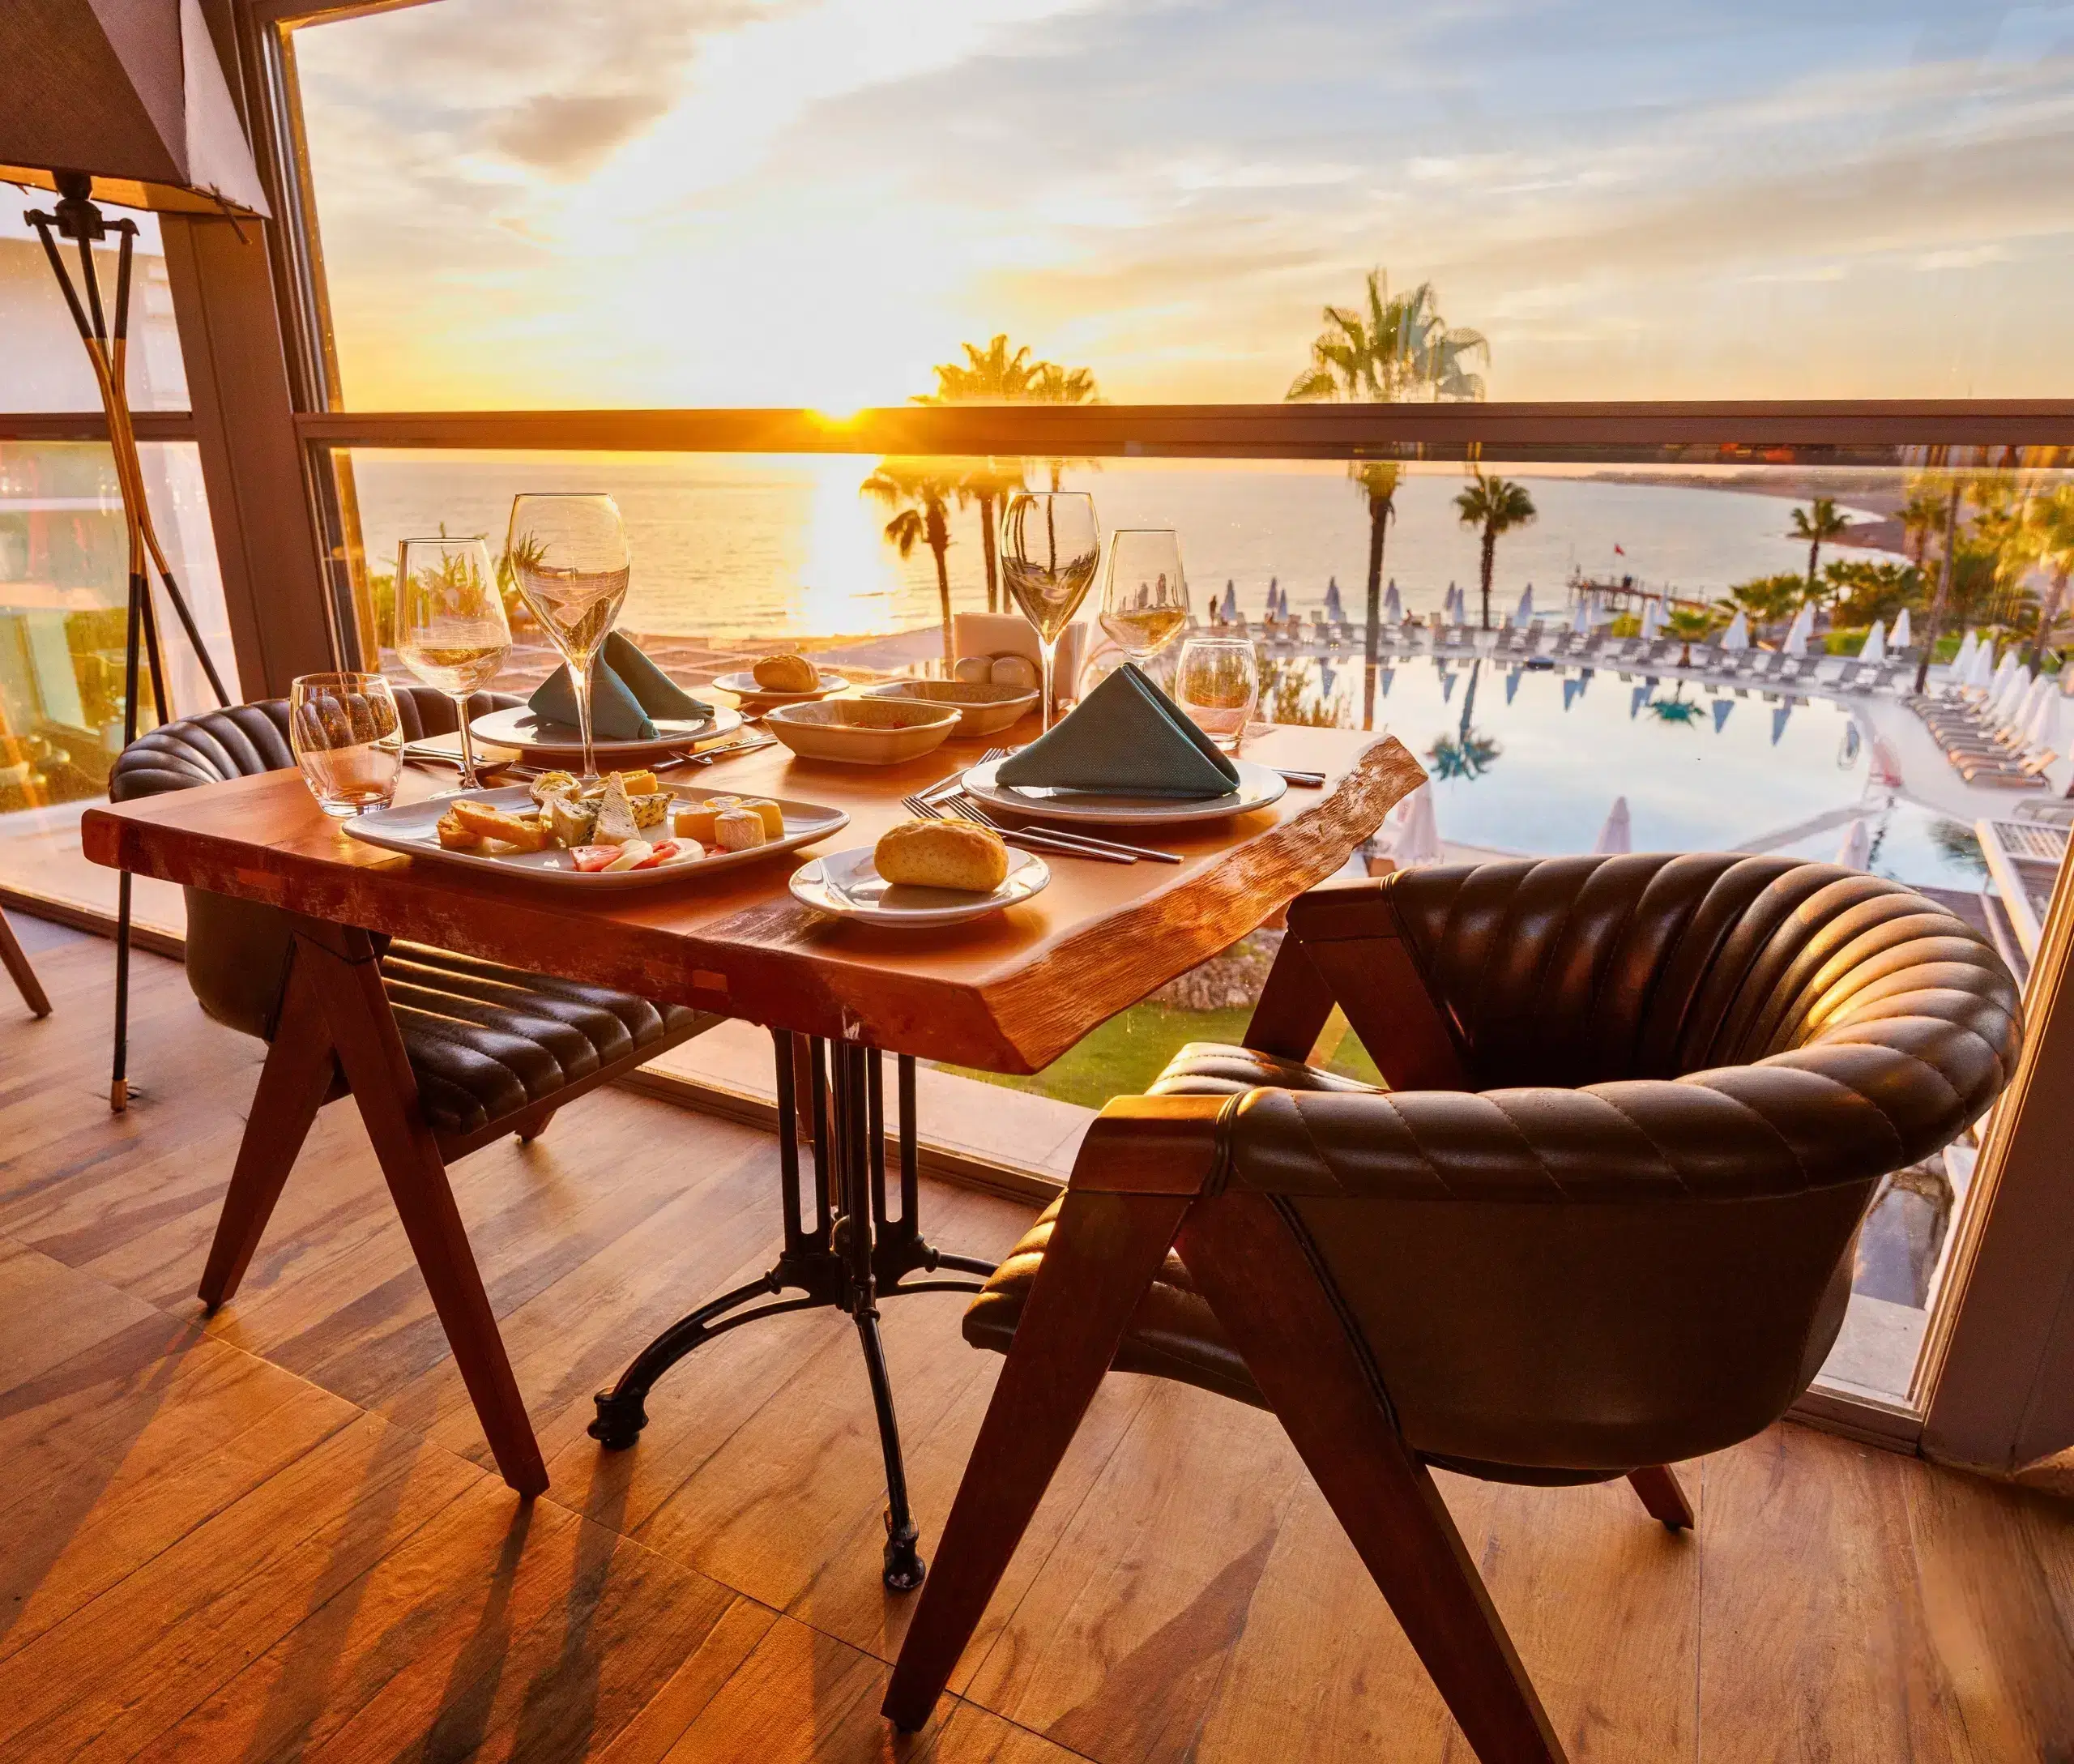 Dinner table set for four with a view of a sunset over a poolside resort.